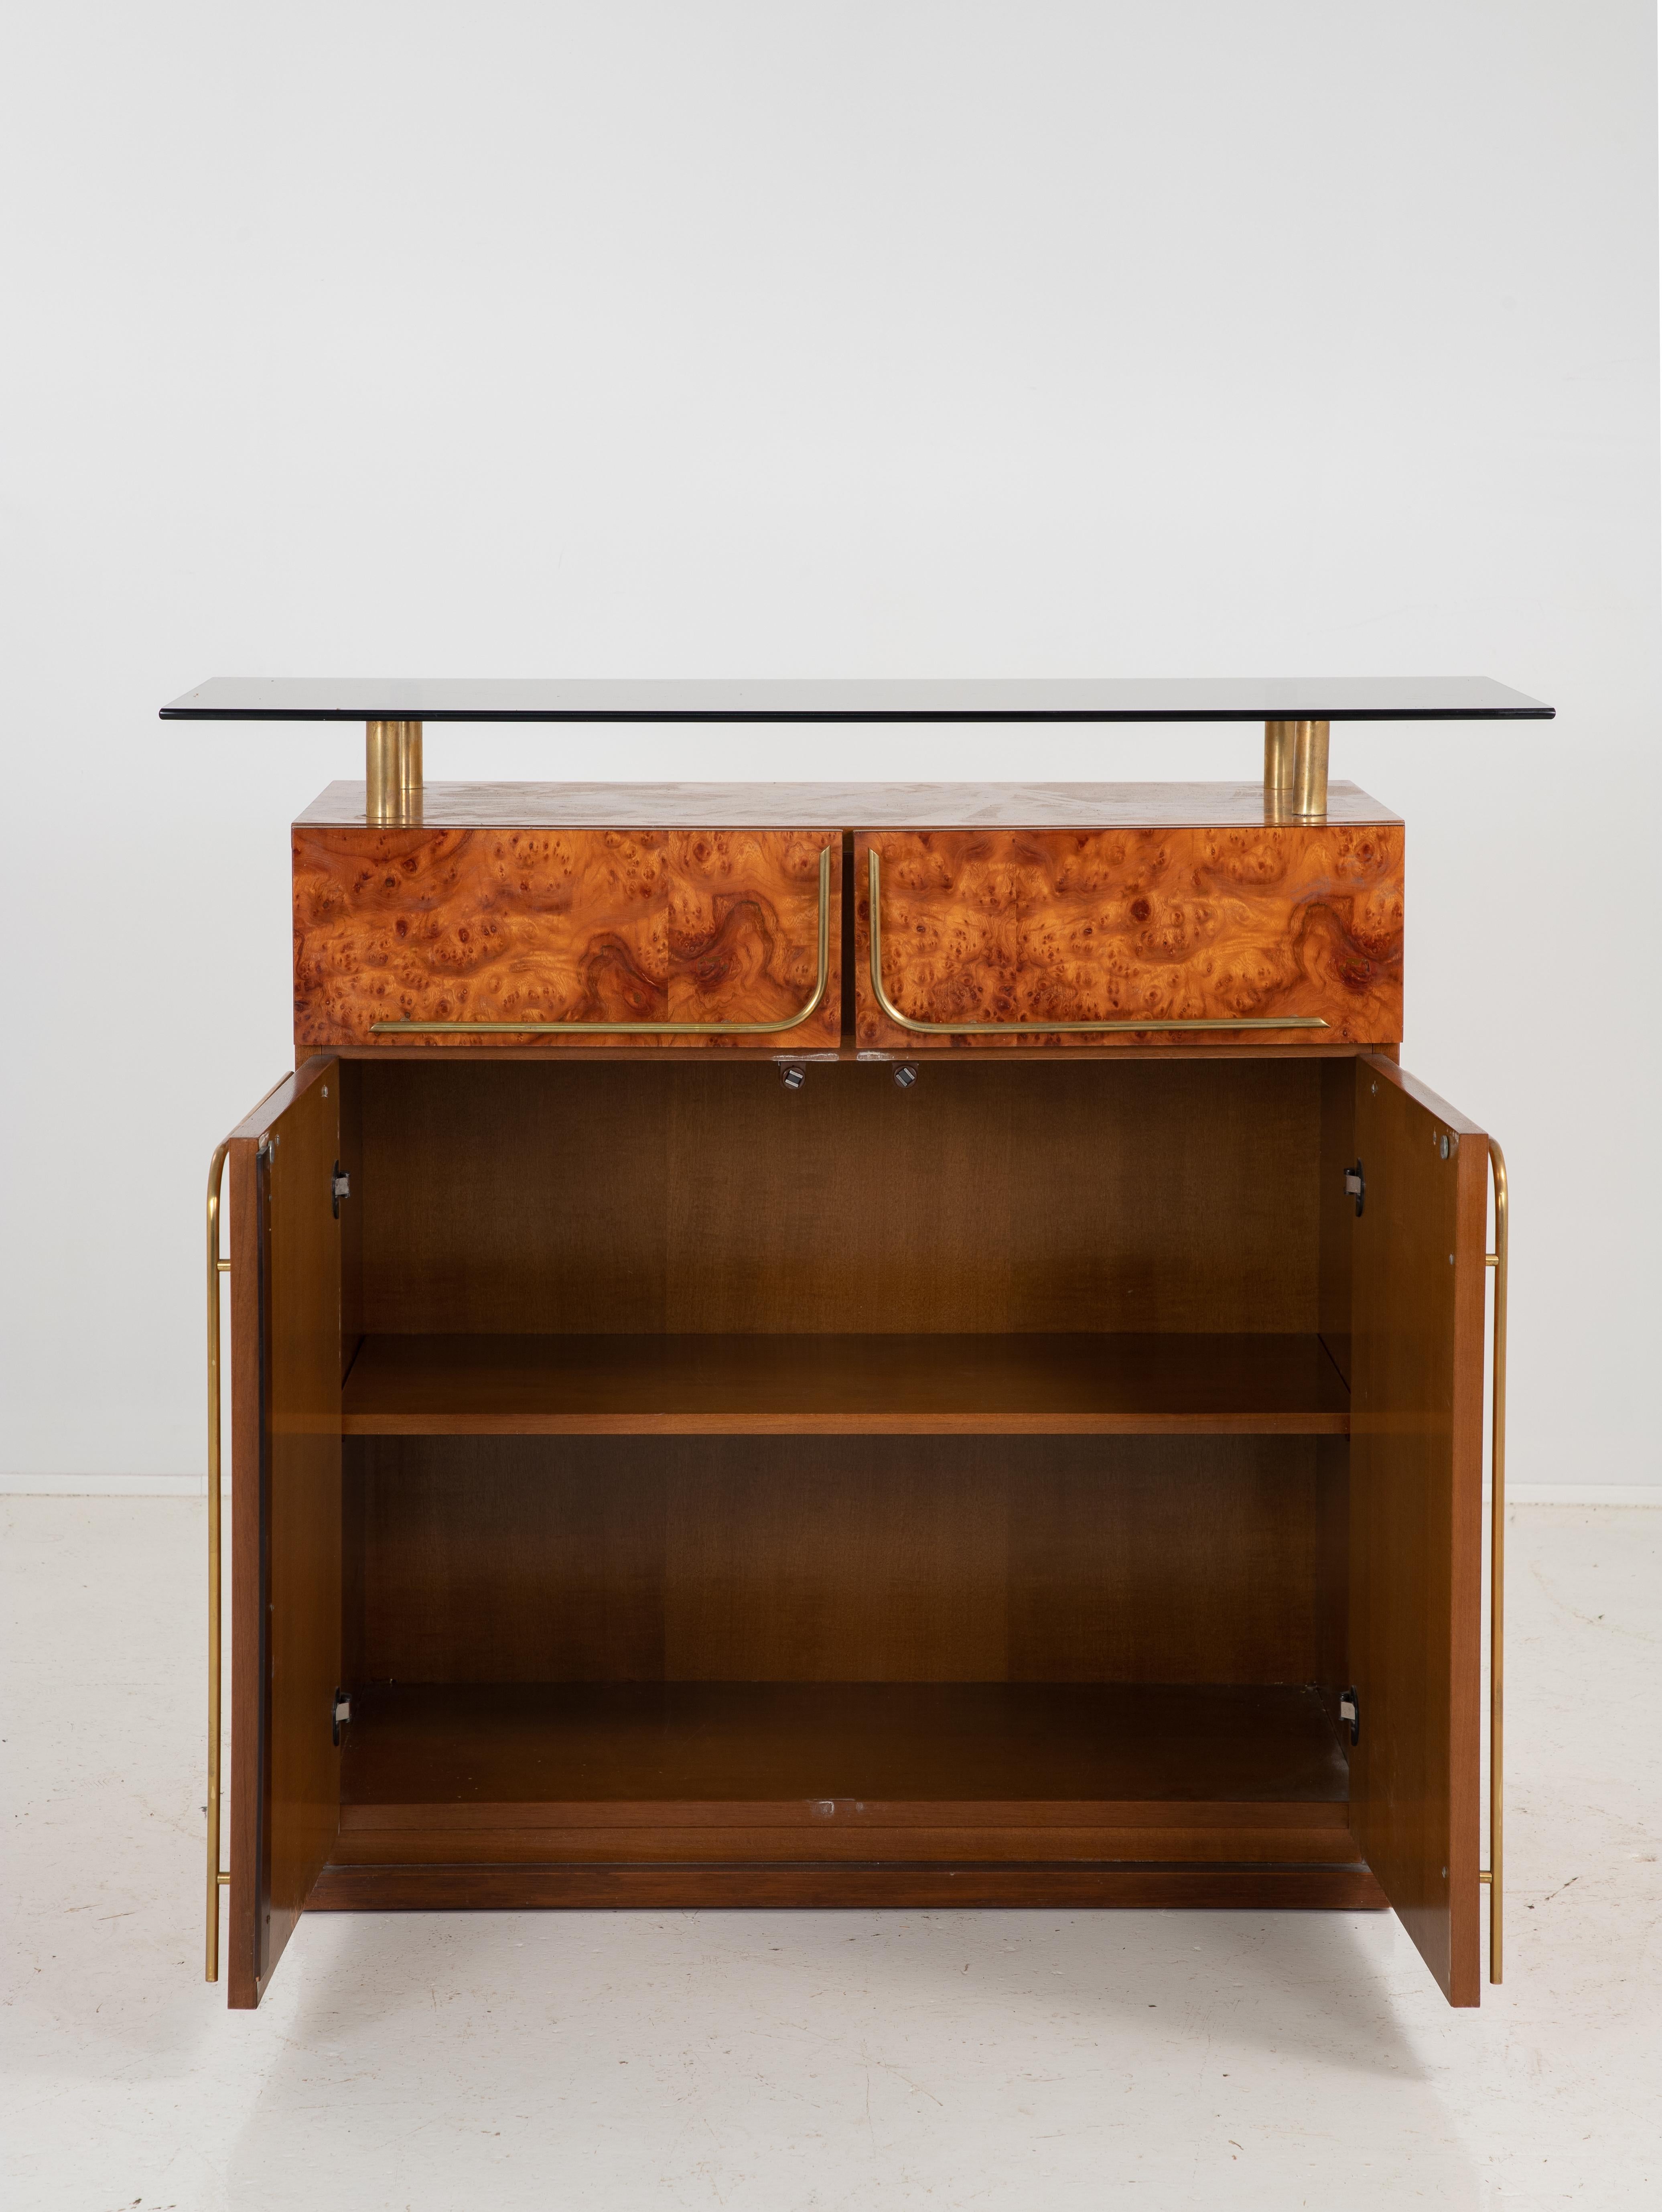 A mid century bar with brass handles and smoked glass elevated shelf. There are two drawers and the door cabinet opens up to reveal a shelf. The top of bar has four brass columns supporting a smoked glass shelf that extends beyond the width of the